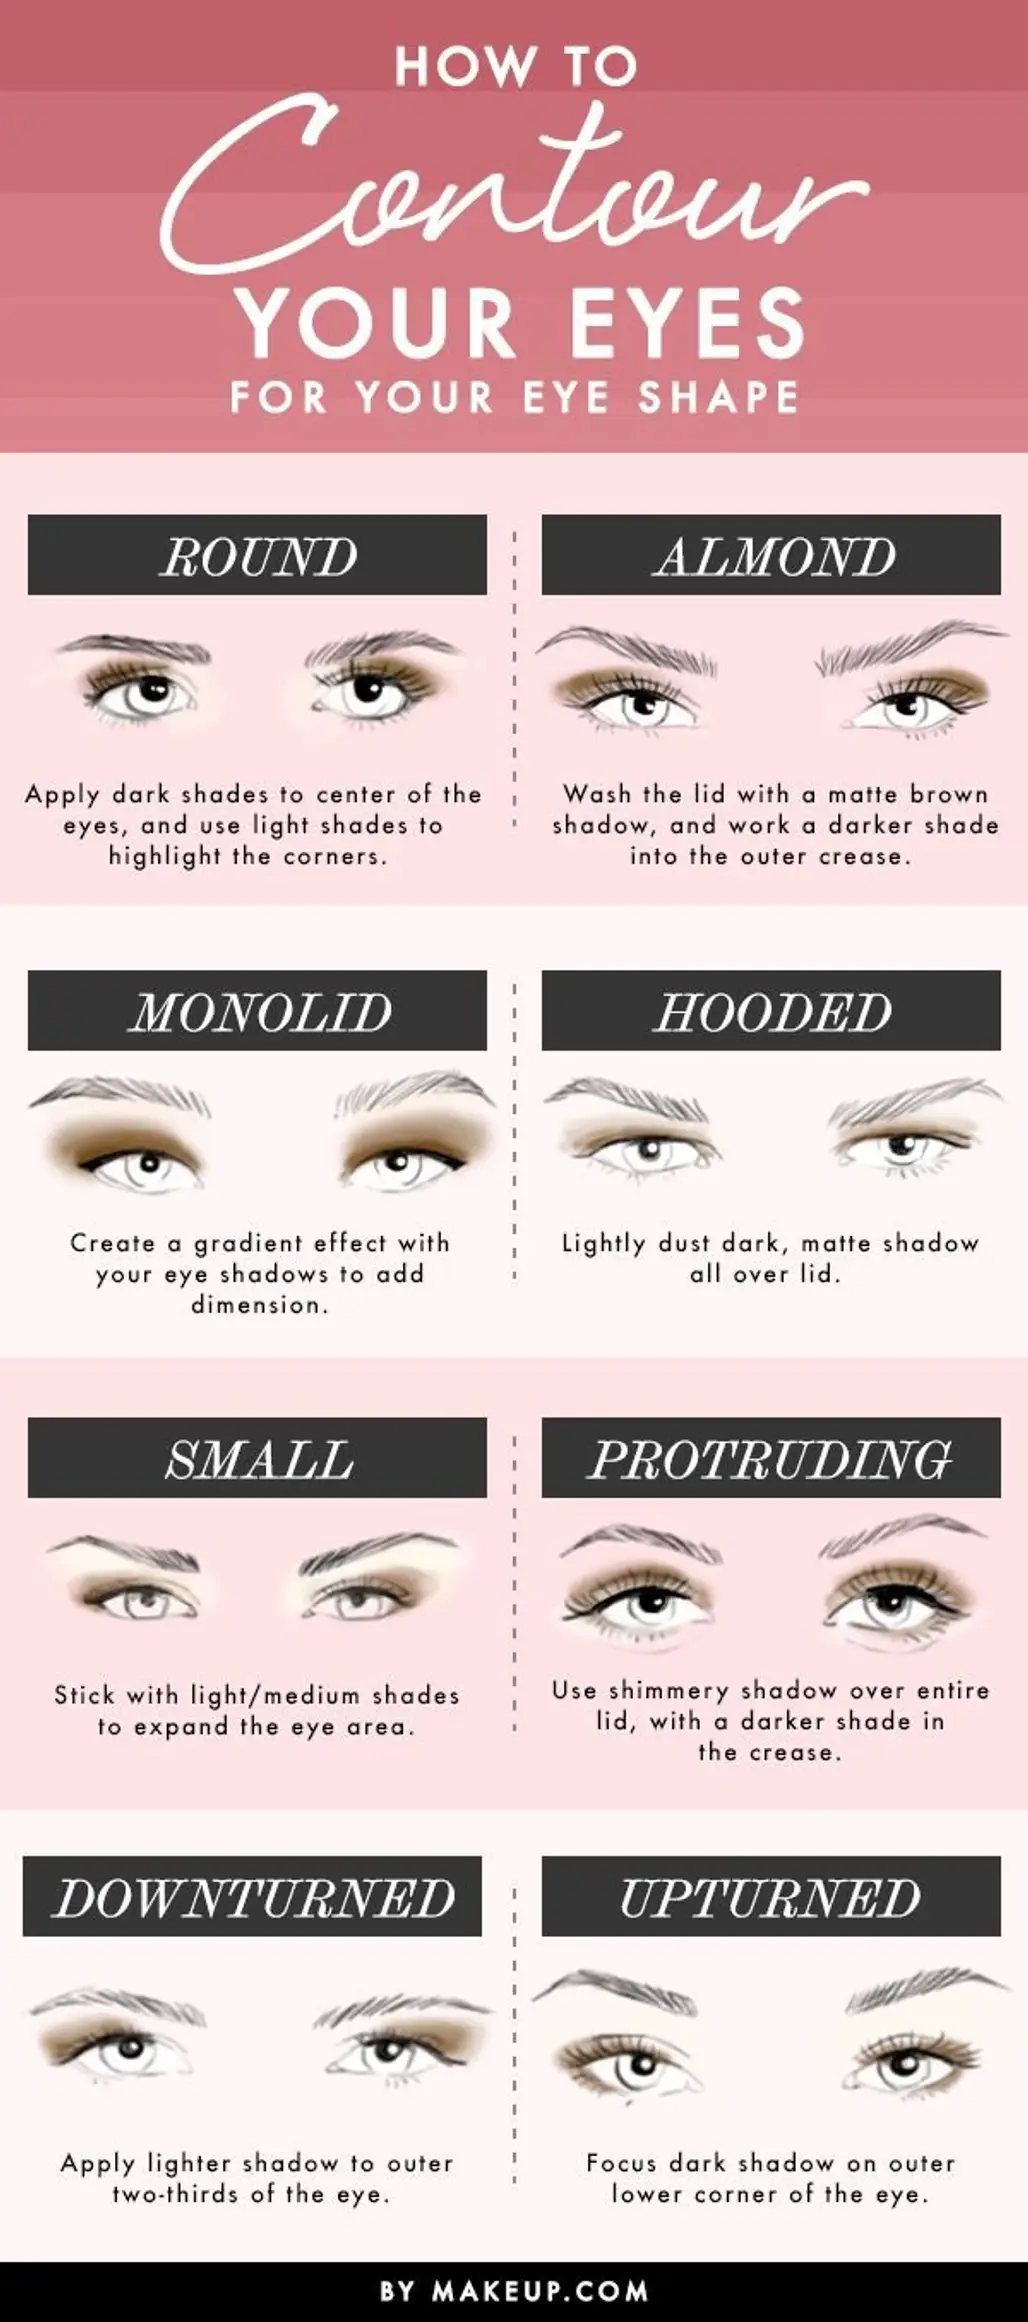 How to Contour Your Eyes